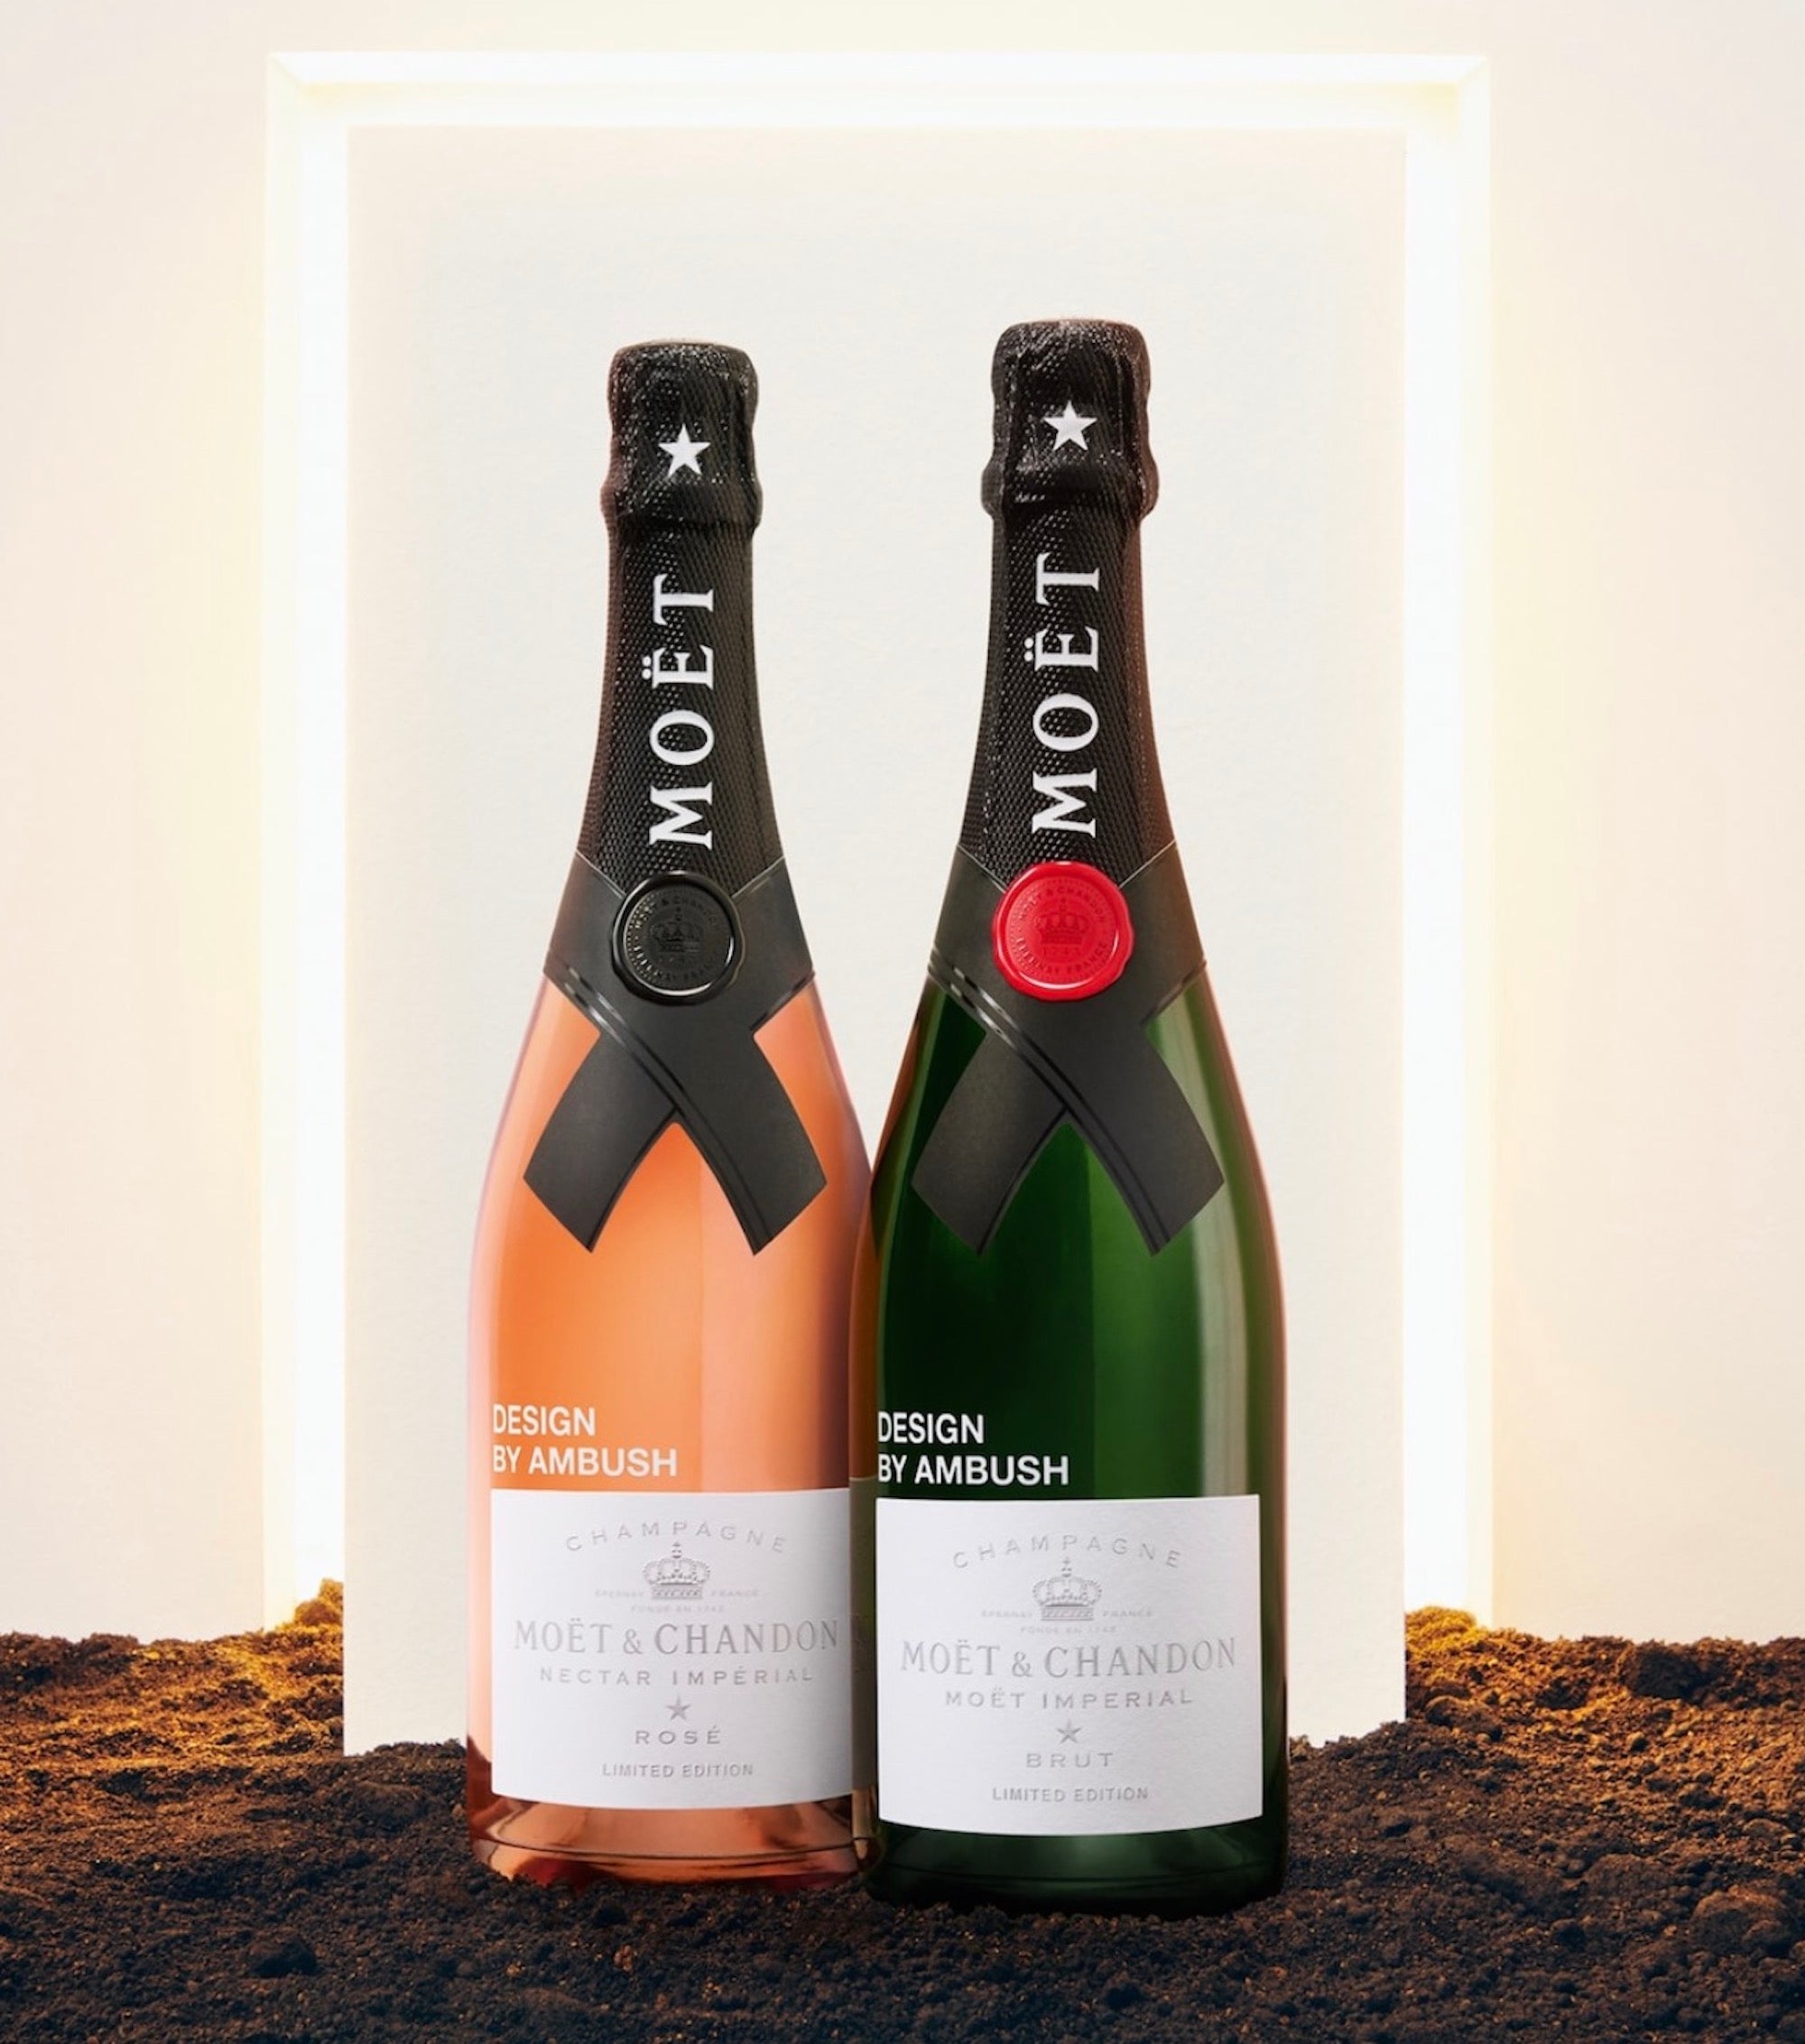 Chandon's New Aperitif Is “The Perfect Sip of Summer”